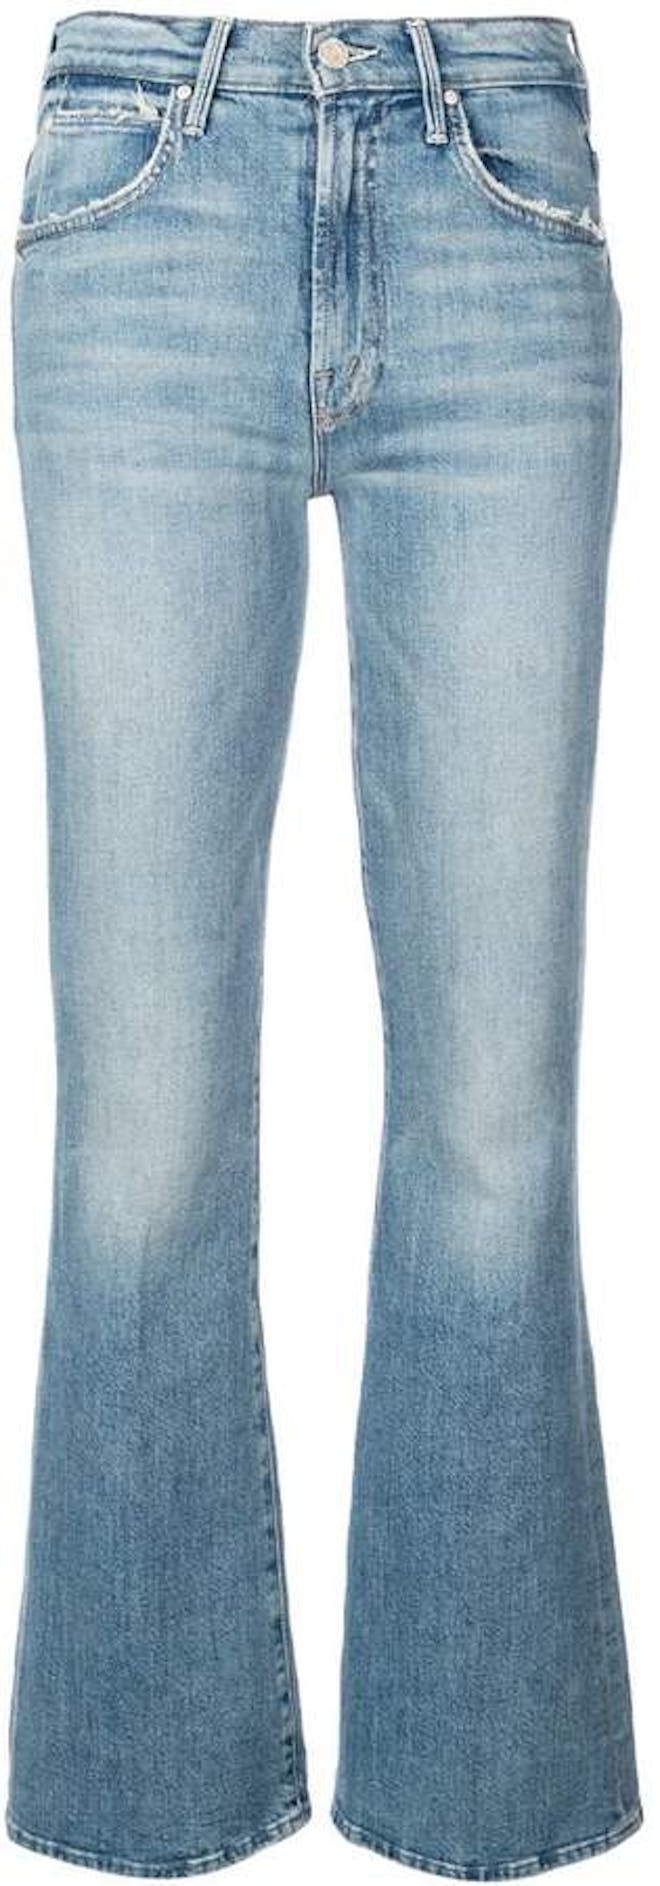 Our Review of Mother Denim - Our Editor's 10 Picks for Best Mother Jeans